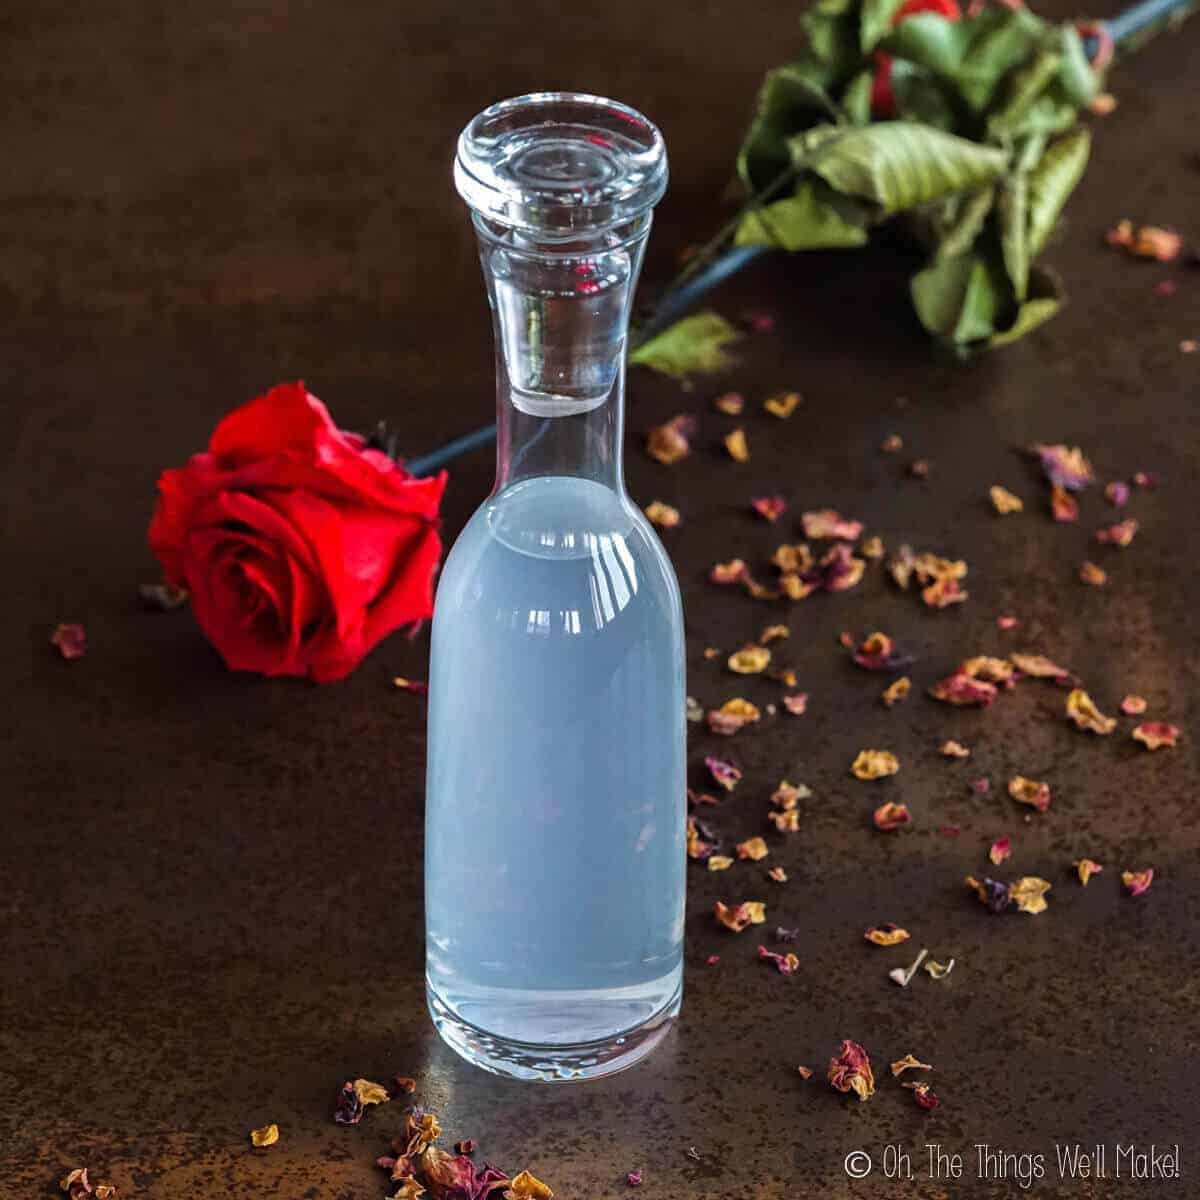 A bottle of homemade rose water hydrosol in front of a rose and rose petals